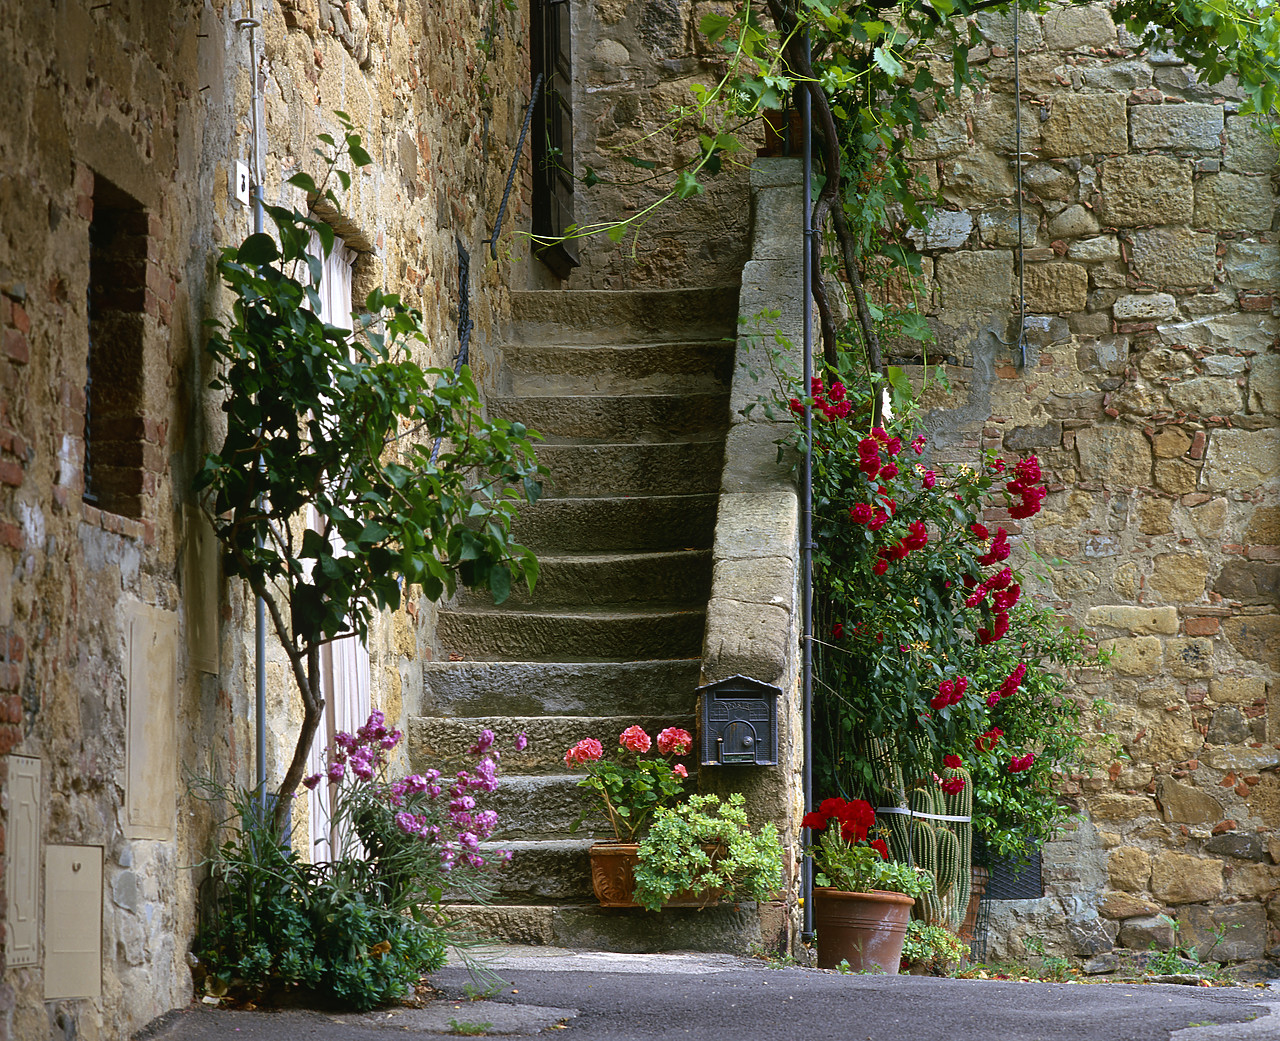 #020205-1 - Stone Staircase & Flowers, Monticchiello, Tuscany, Italy